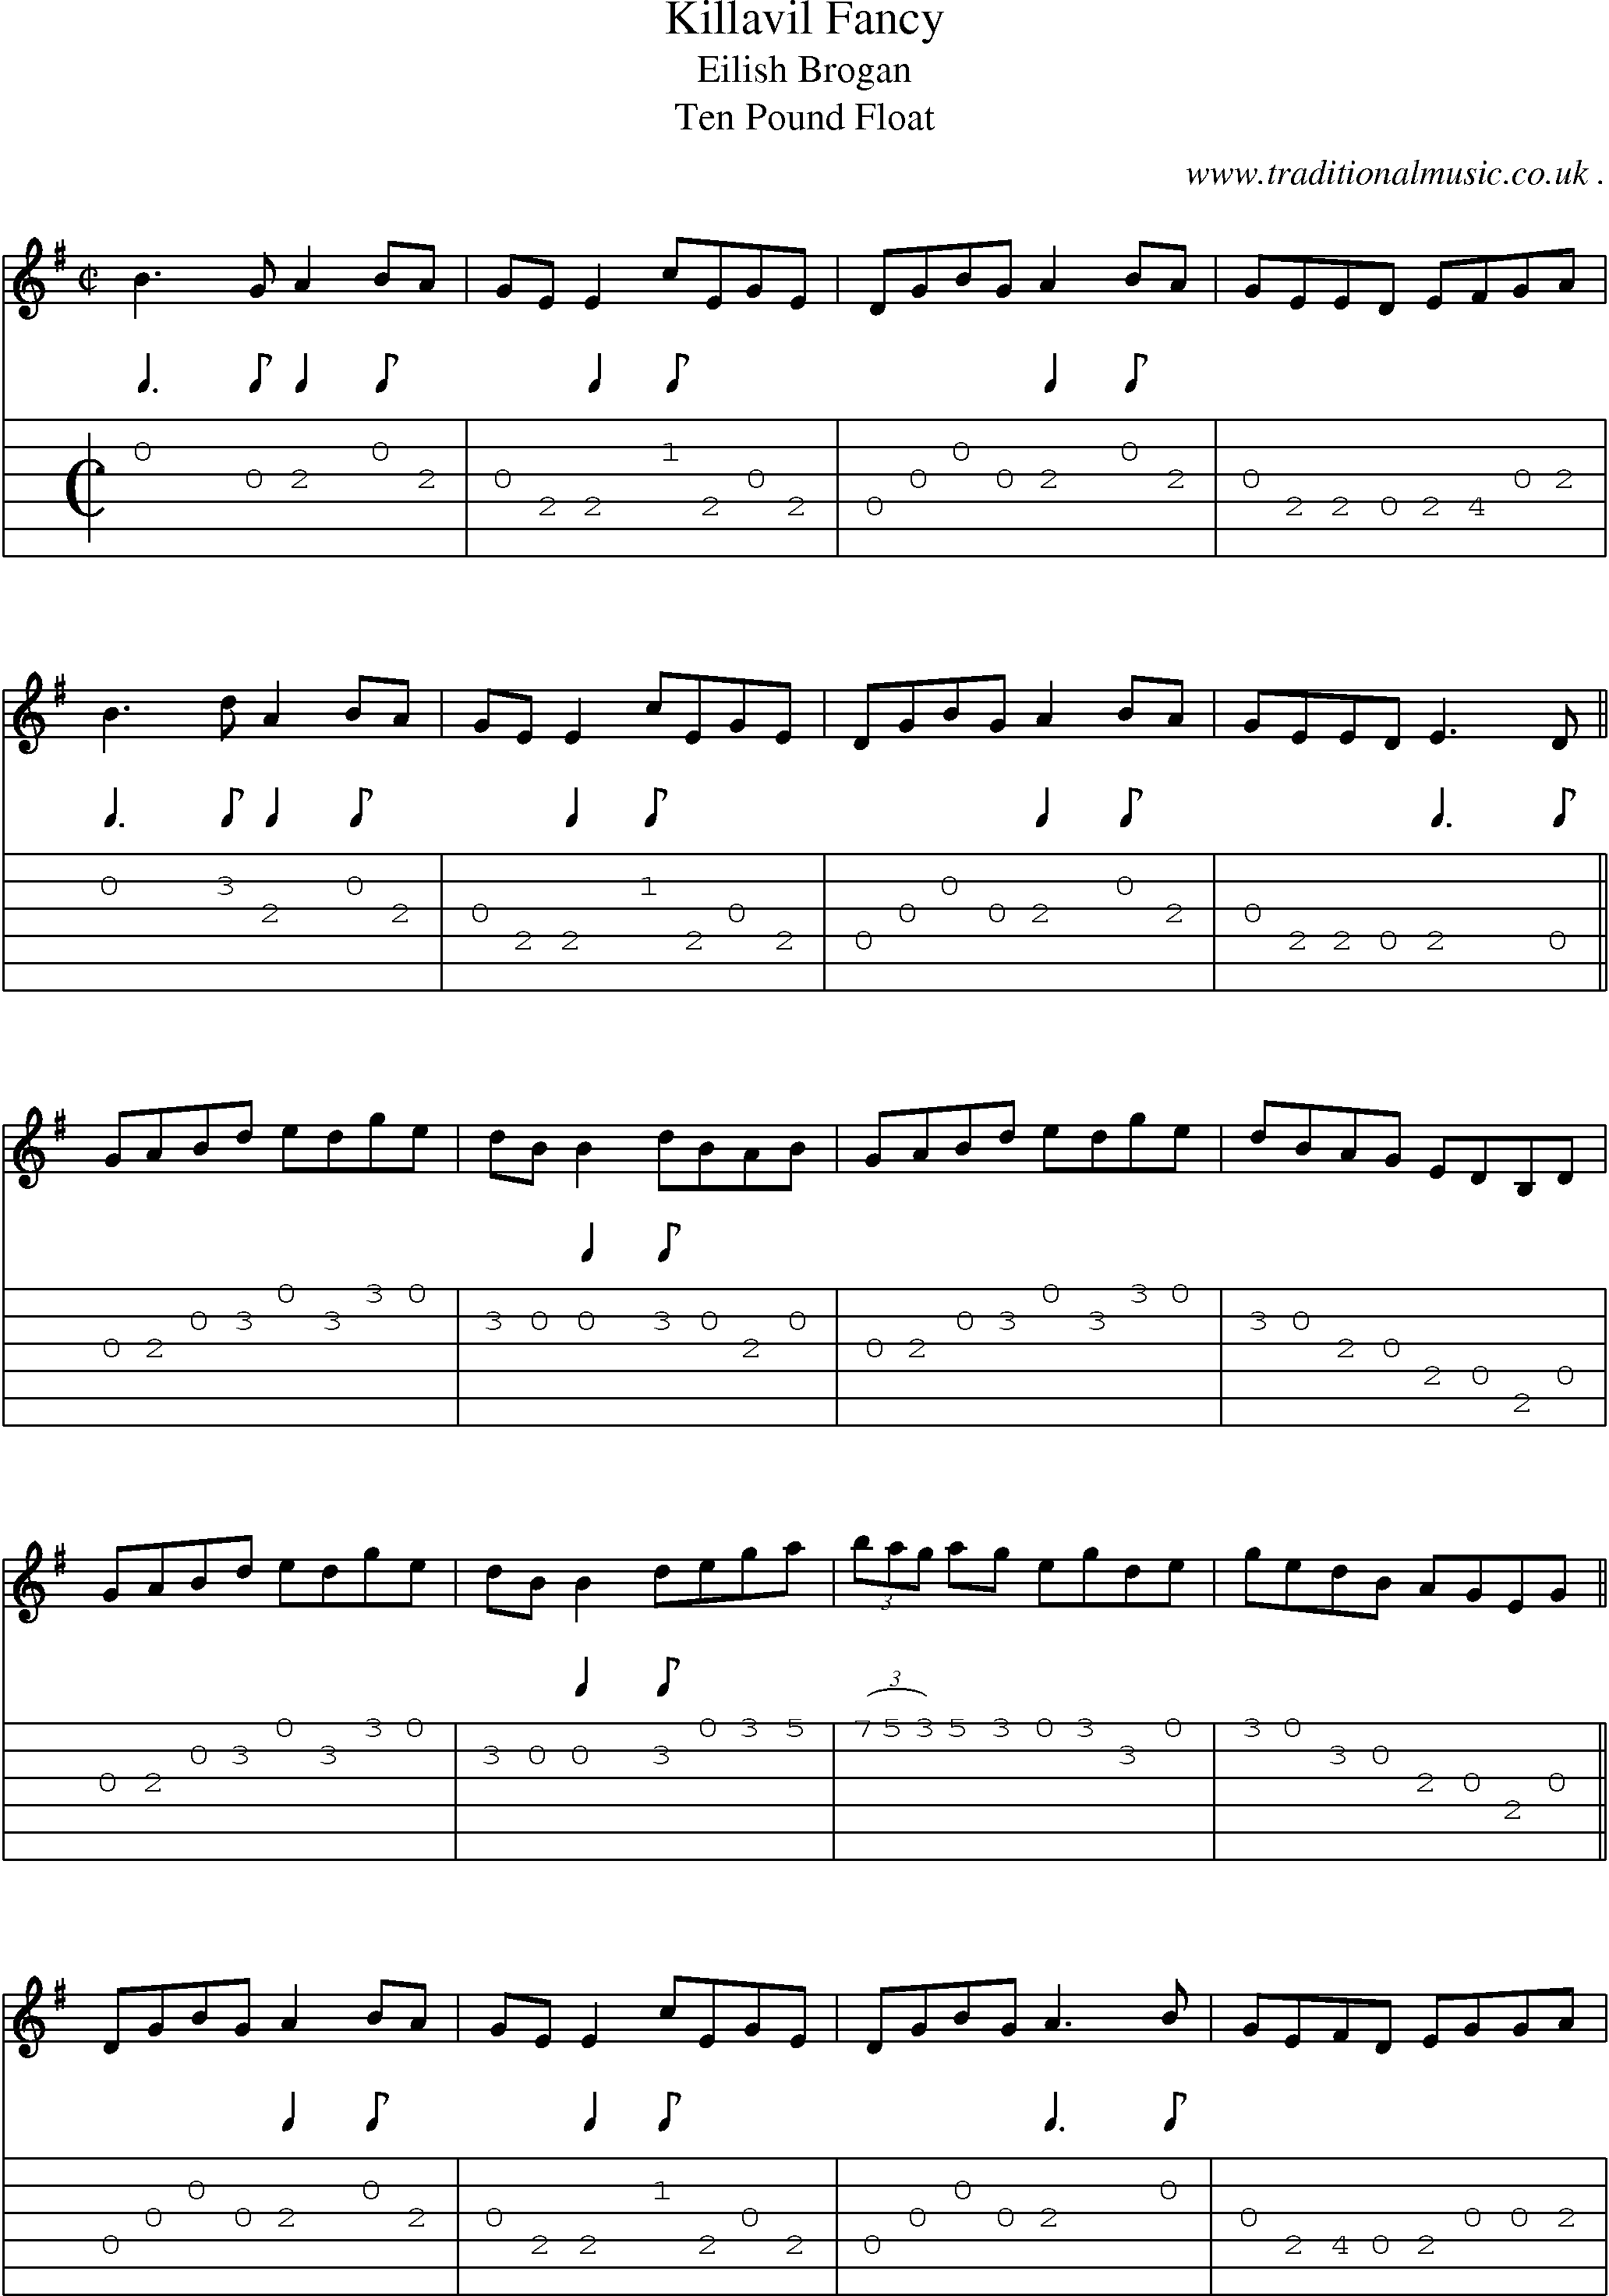 Sheet-Music and Guitar Tabs for Killavil Fancy